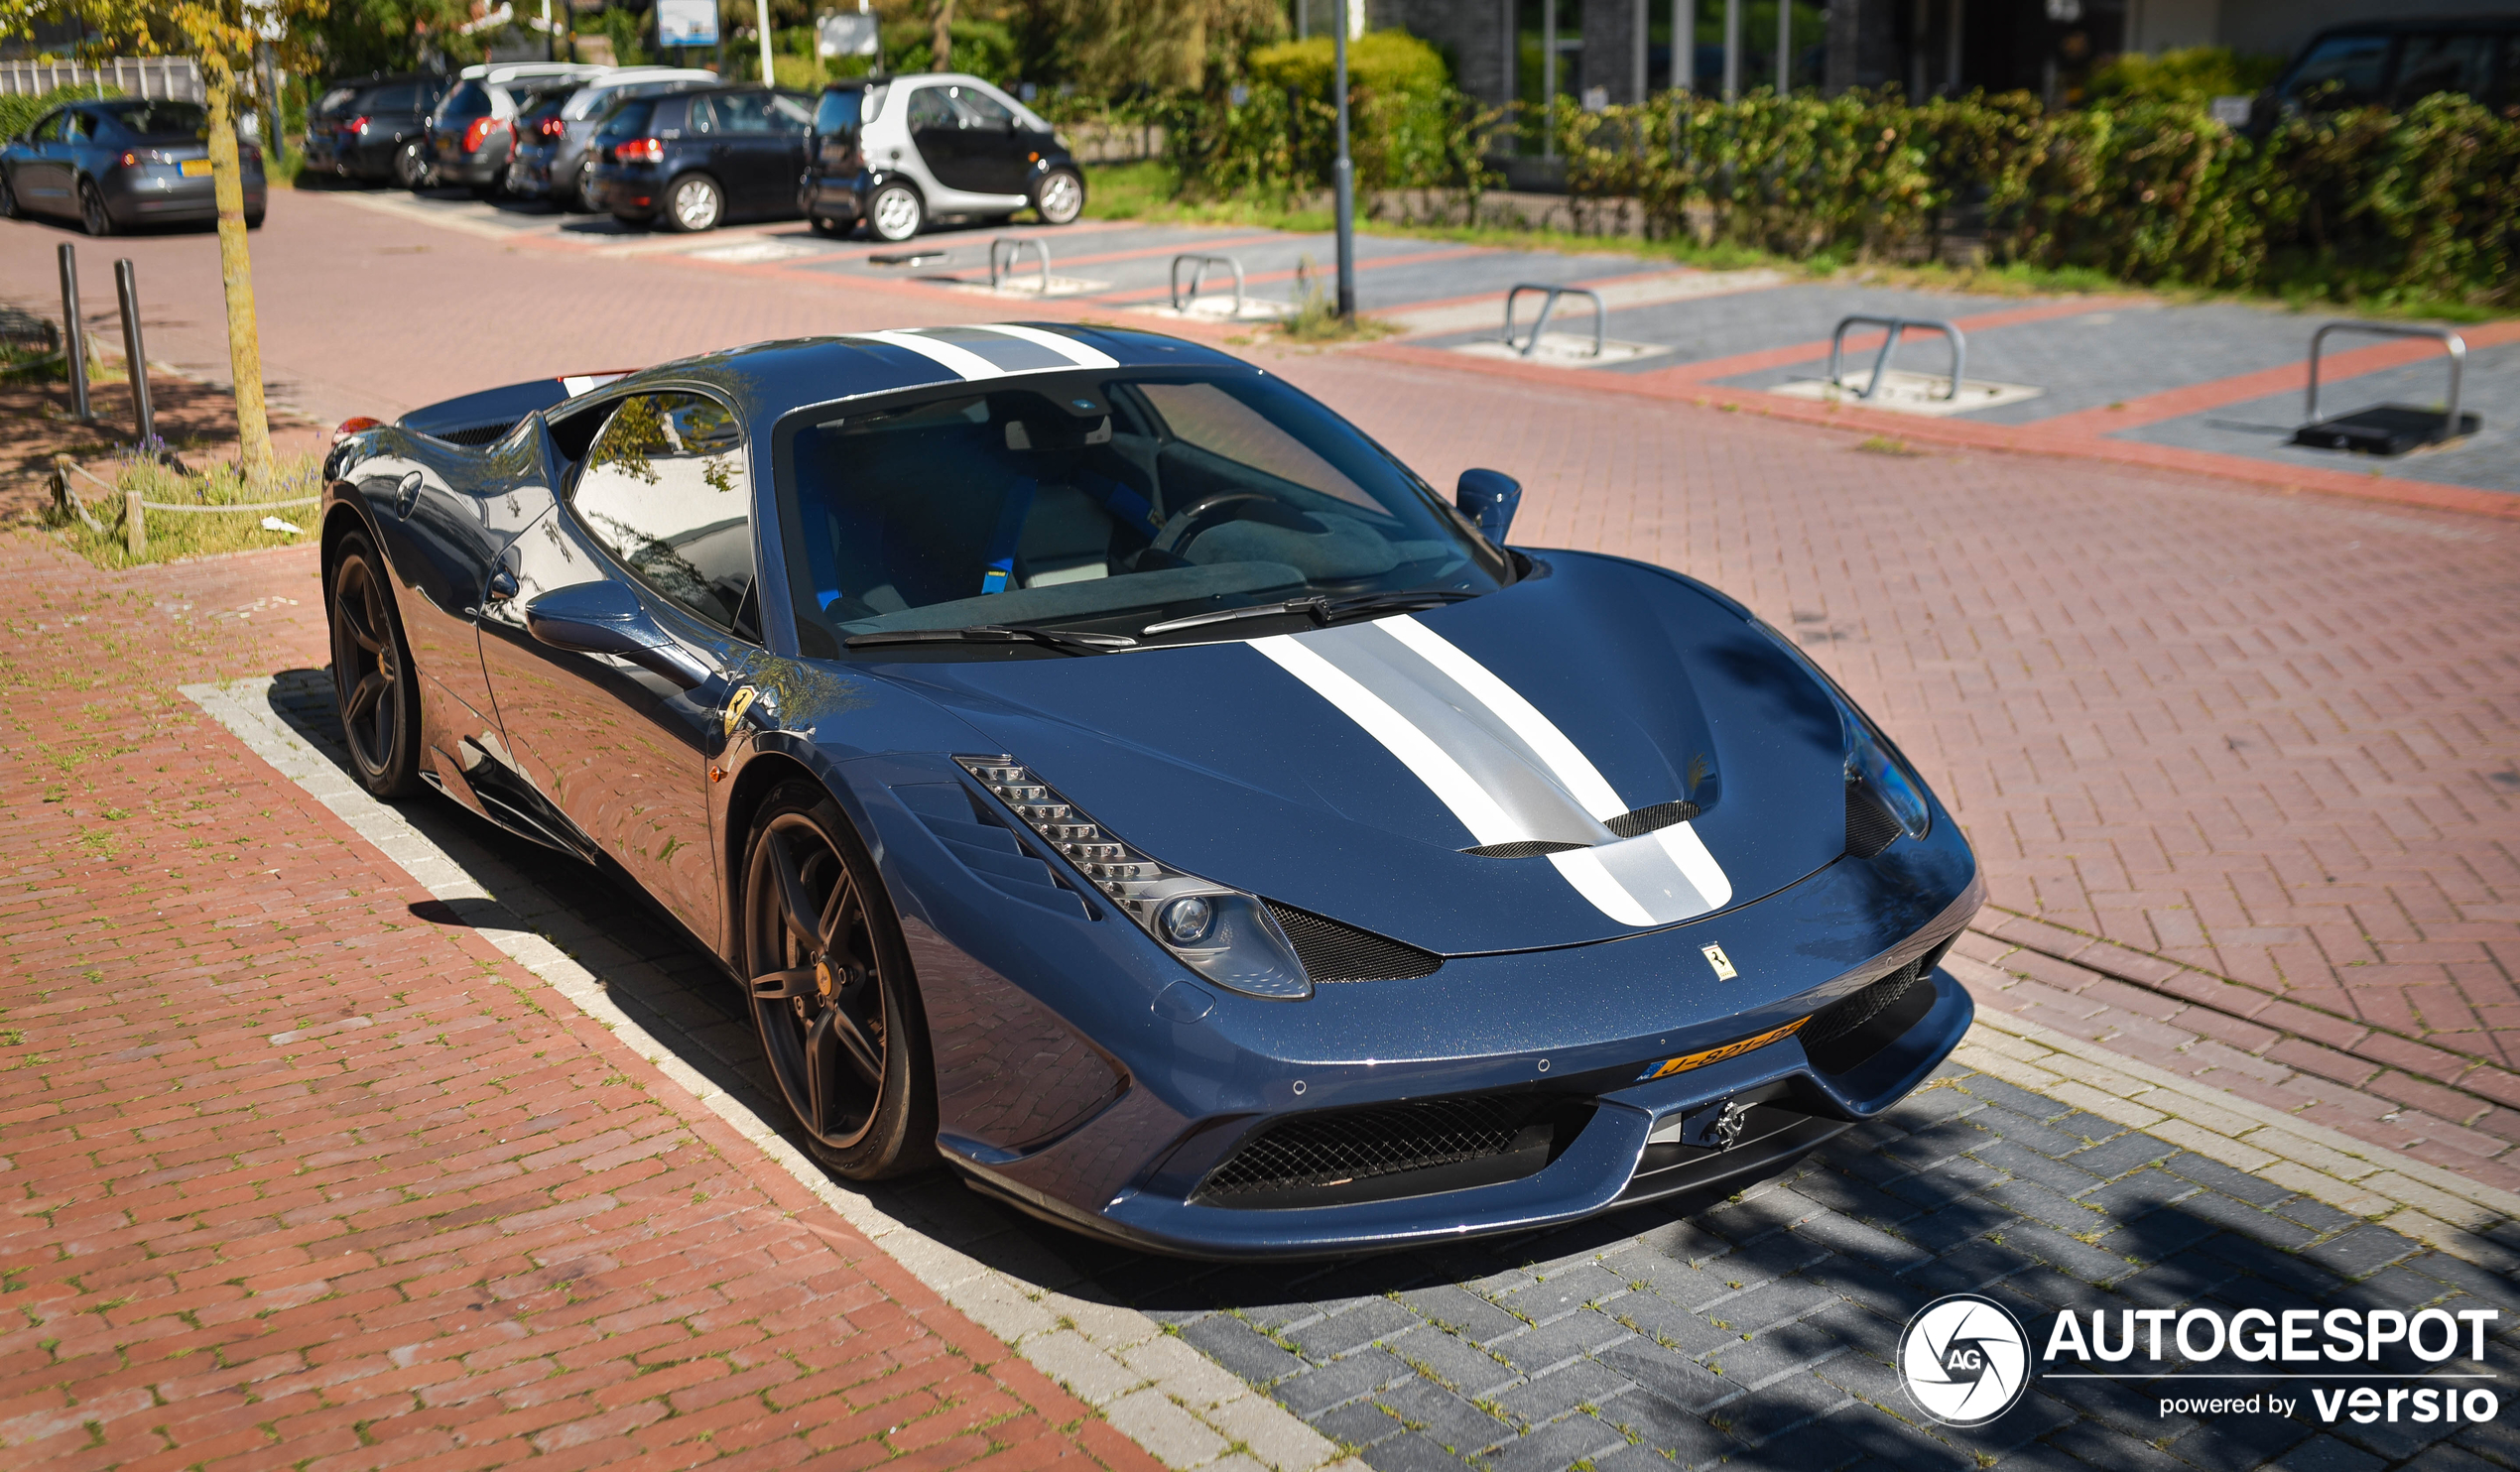 A beautiful 458 Speciale shows up in Oud-Loosdrecht.